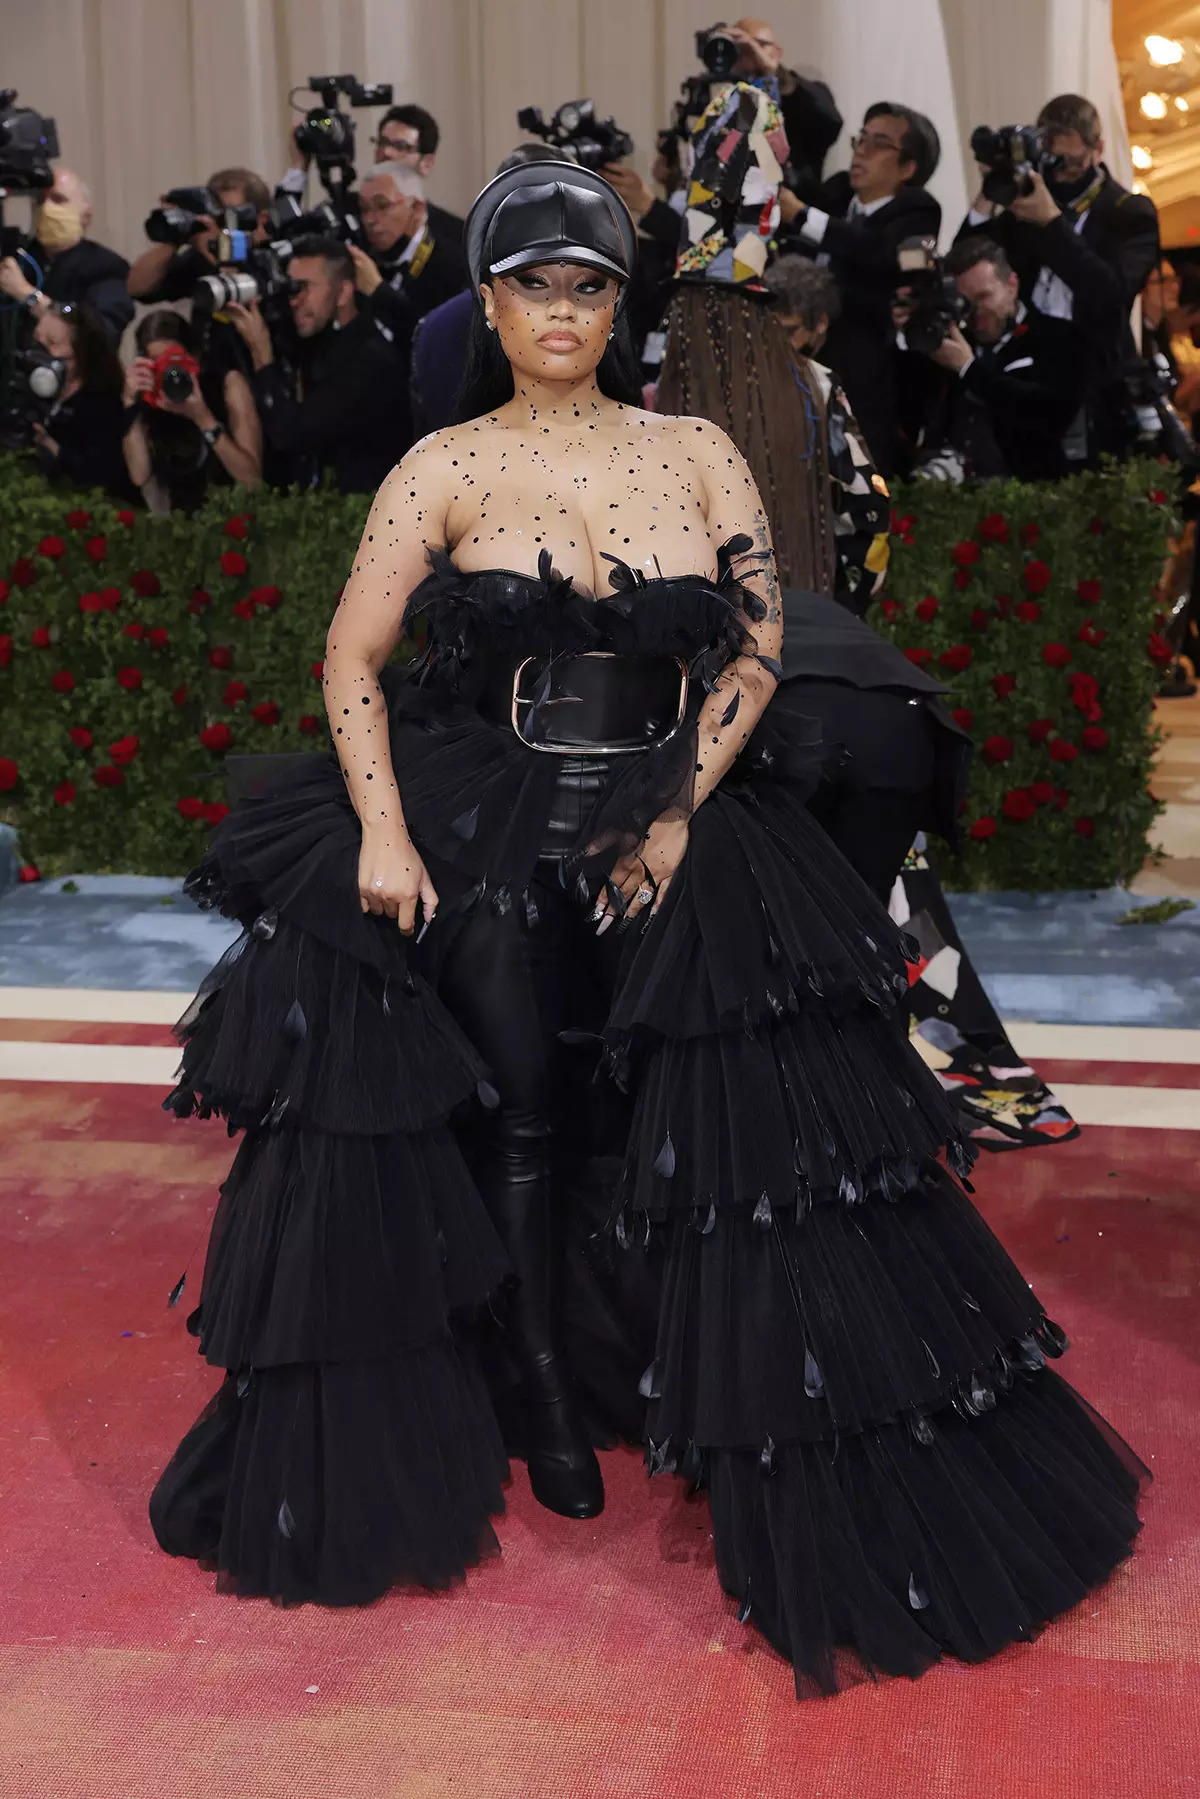 Met Gala 2022 best looks in photos: Blake Lively, Kim Kardashian, Gigi Hadid and other celebs make stylish appearances on the red carpet